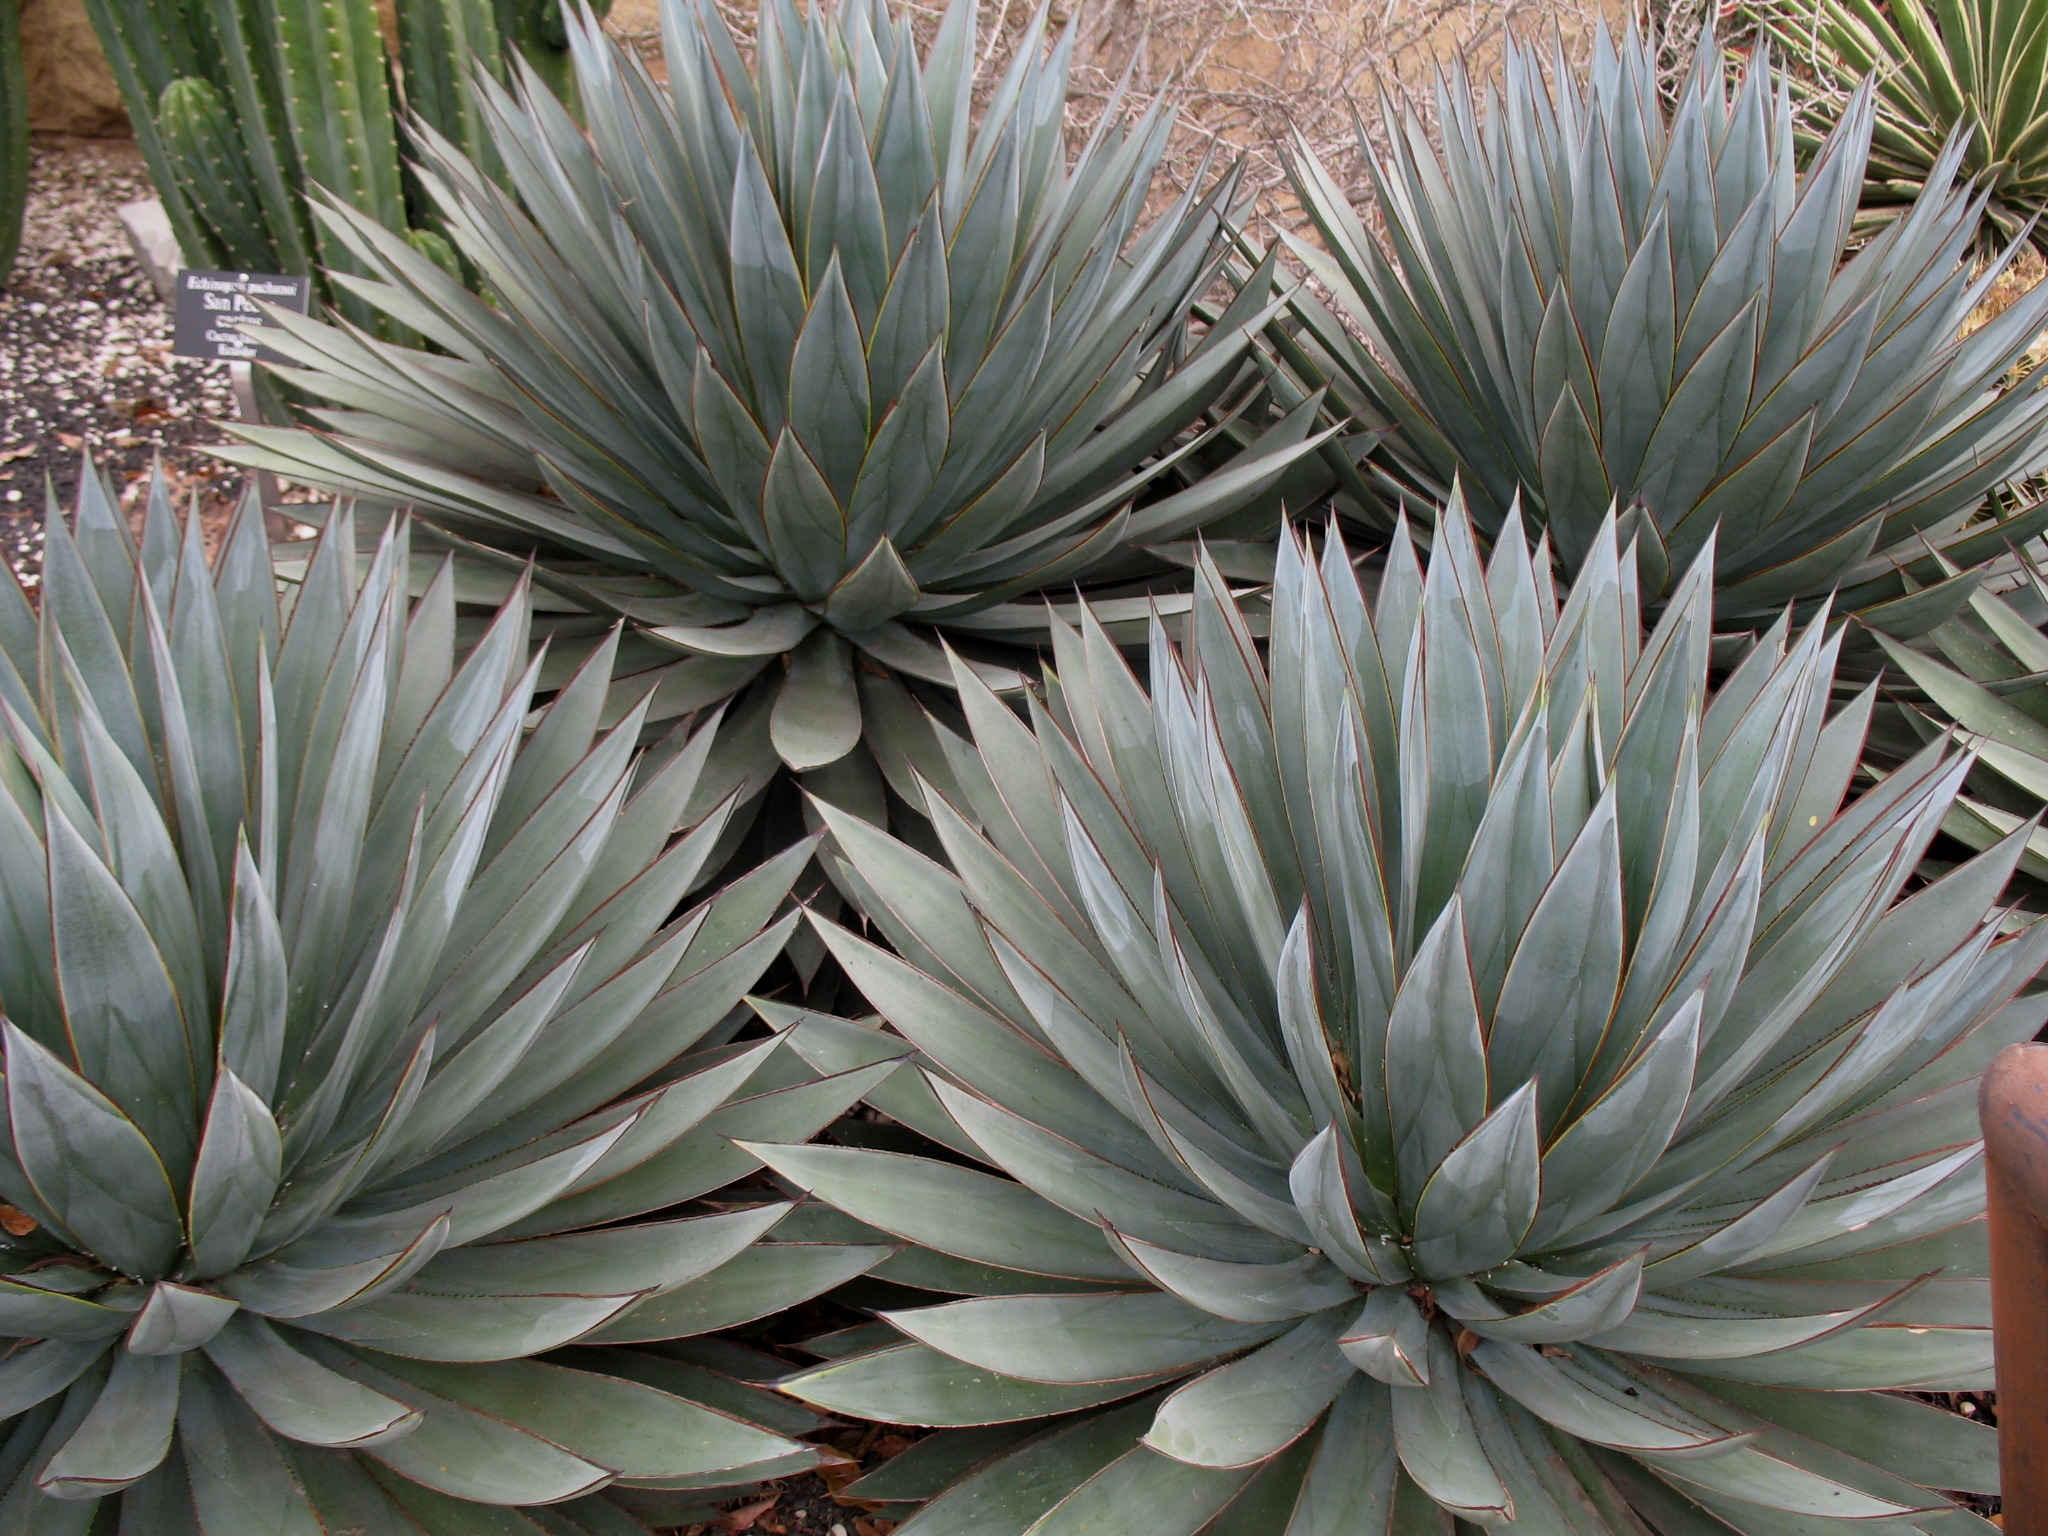 Agave 'Blue Glow' / Agave 'Blue Glow'